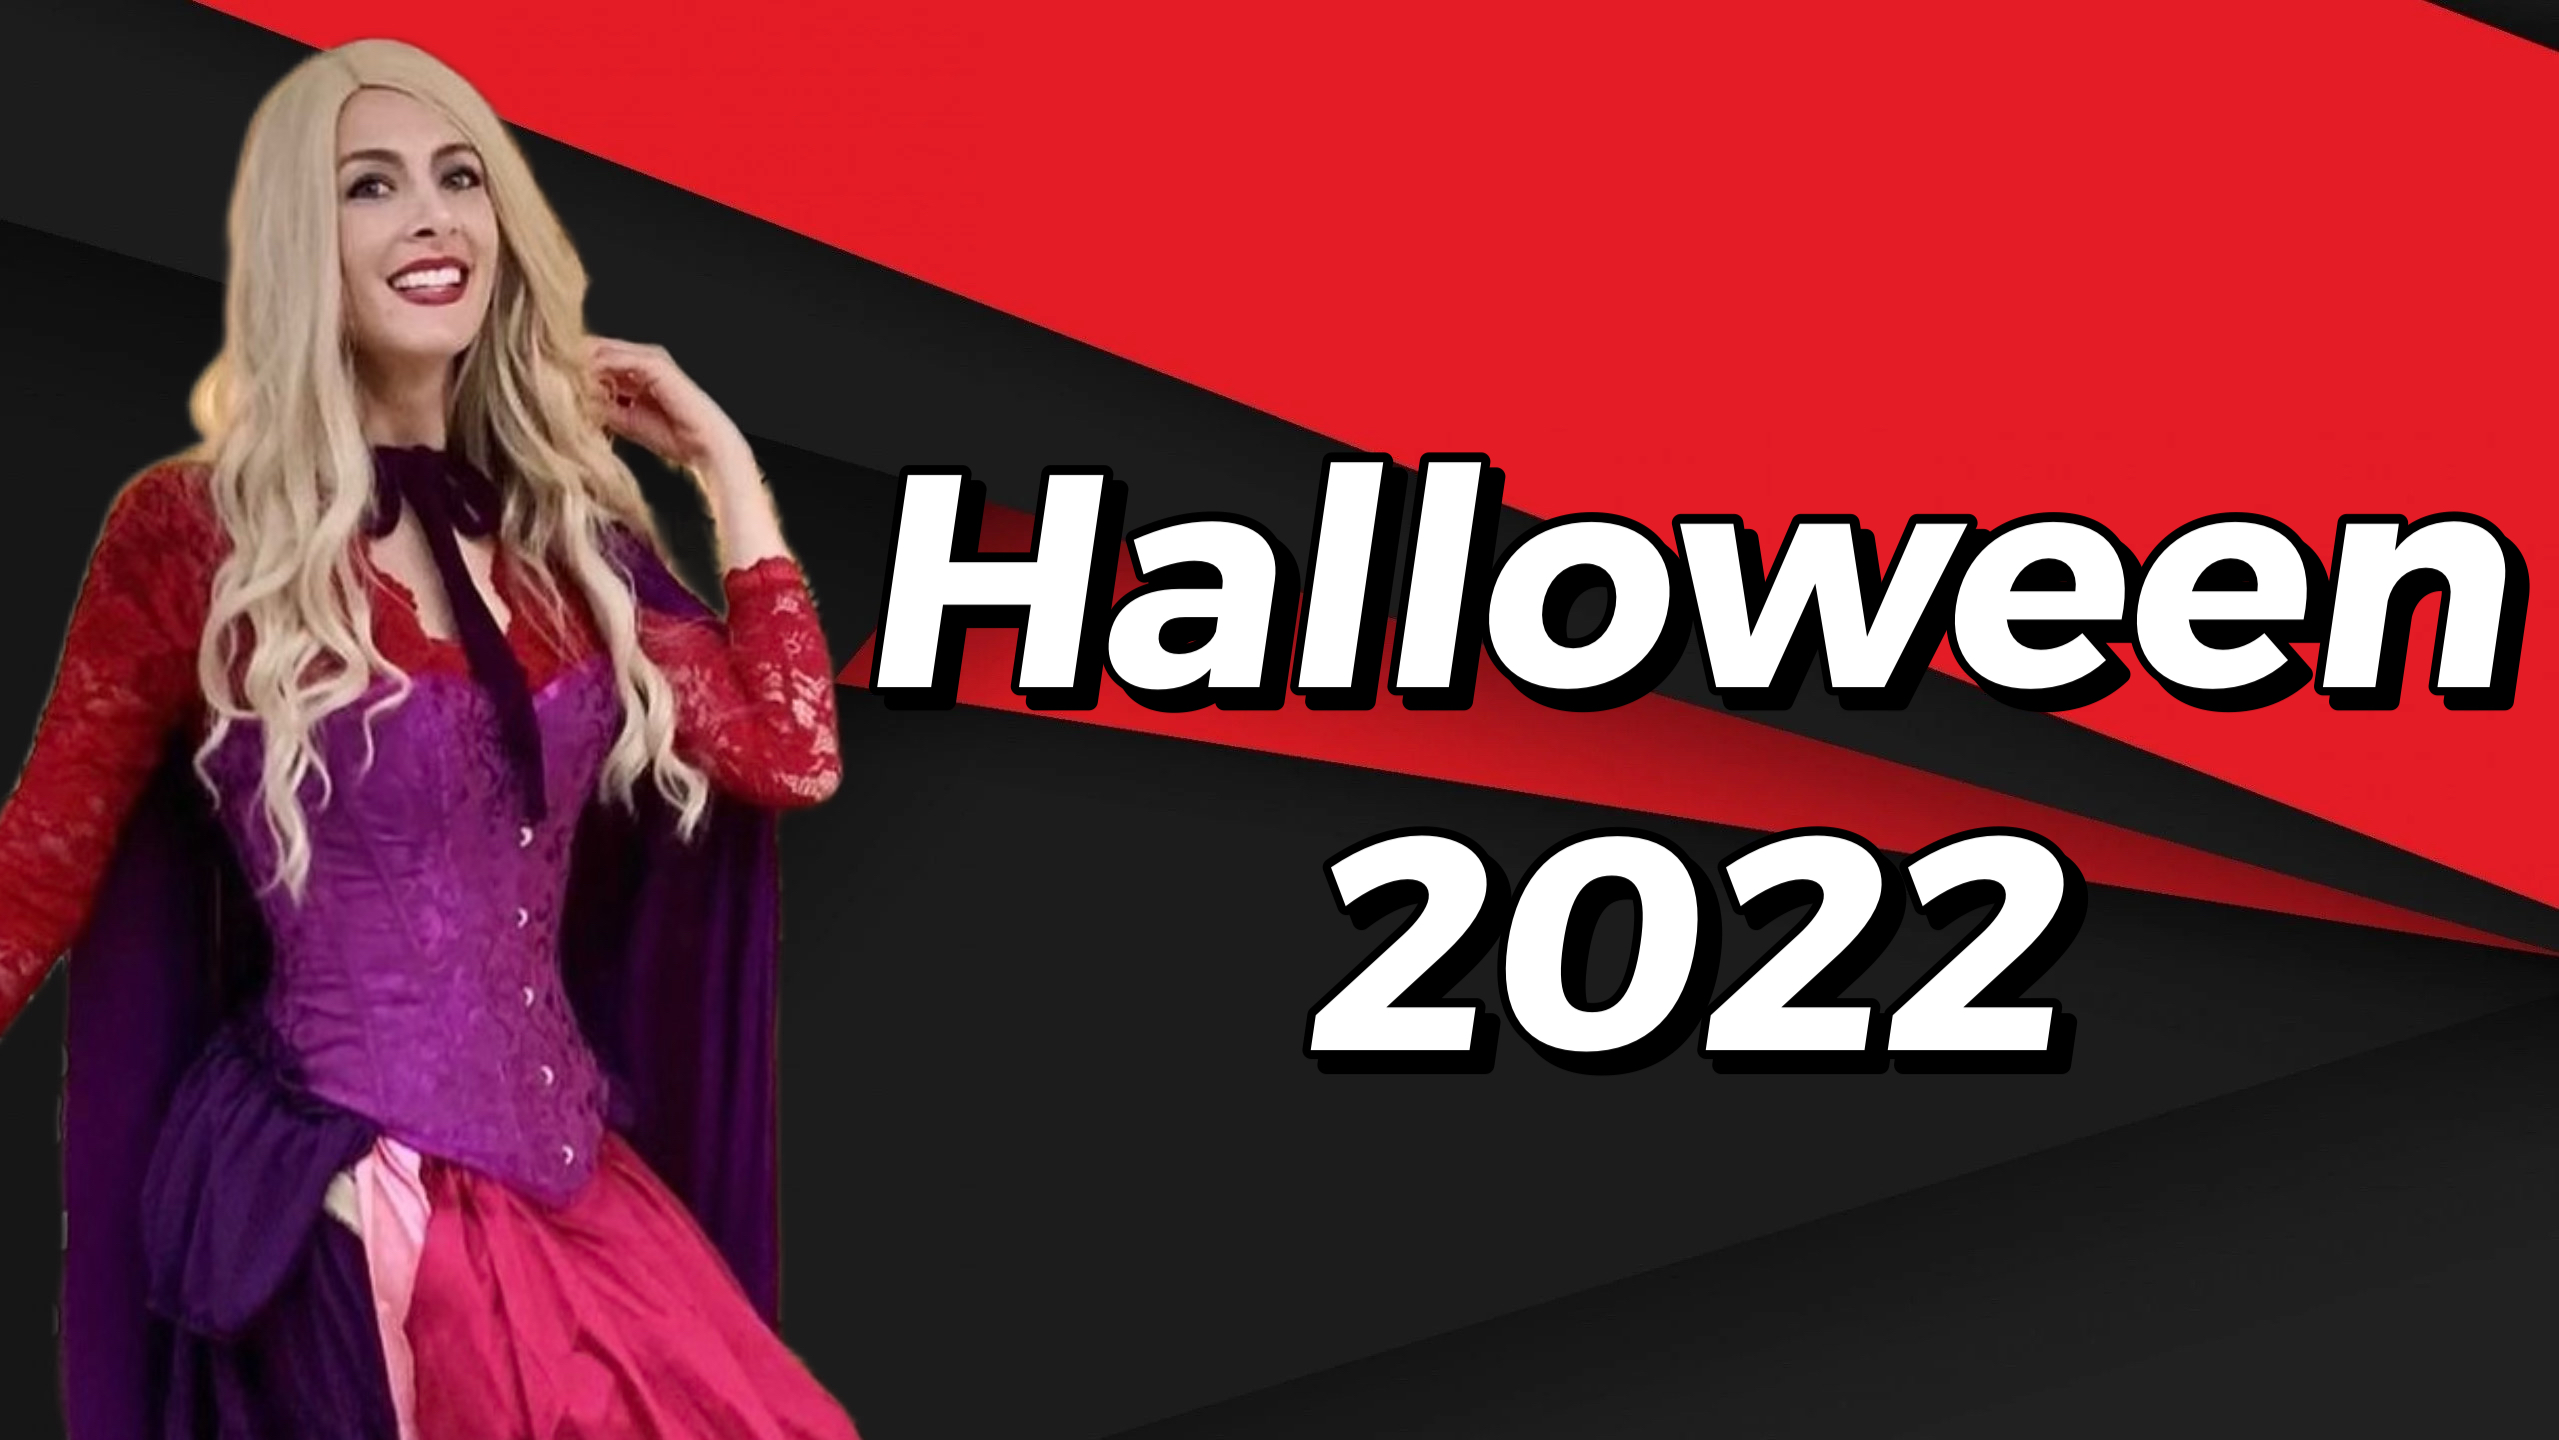 Our Favorite Disney-Inspired Halloween Costumes of 2022